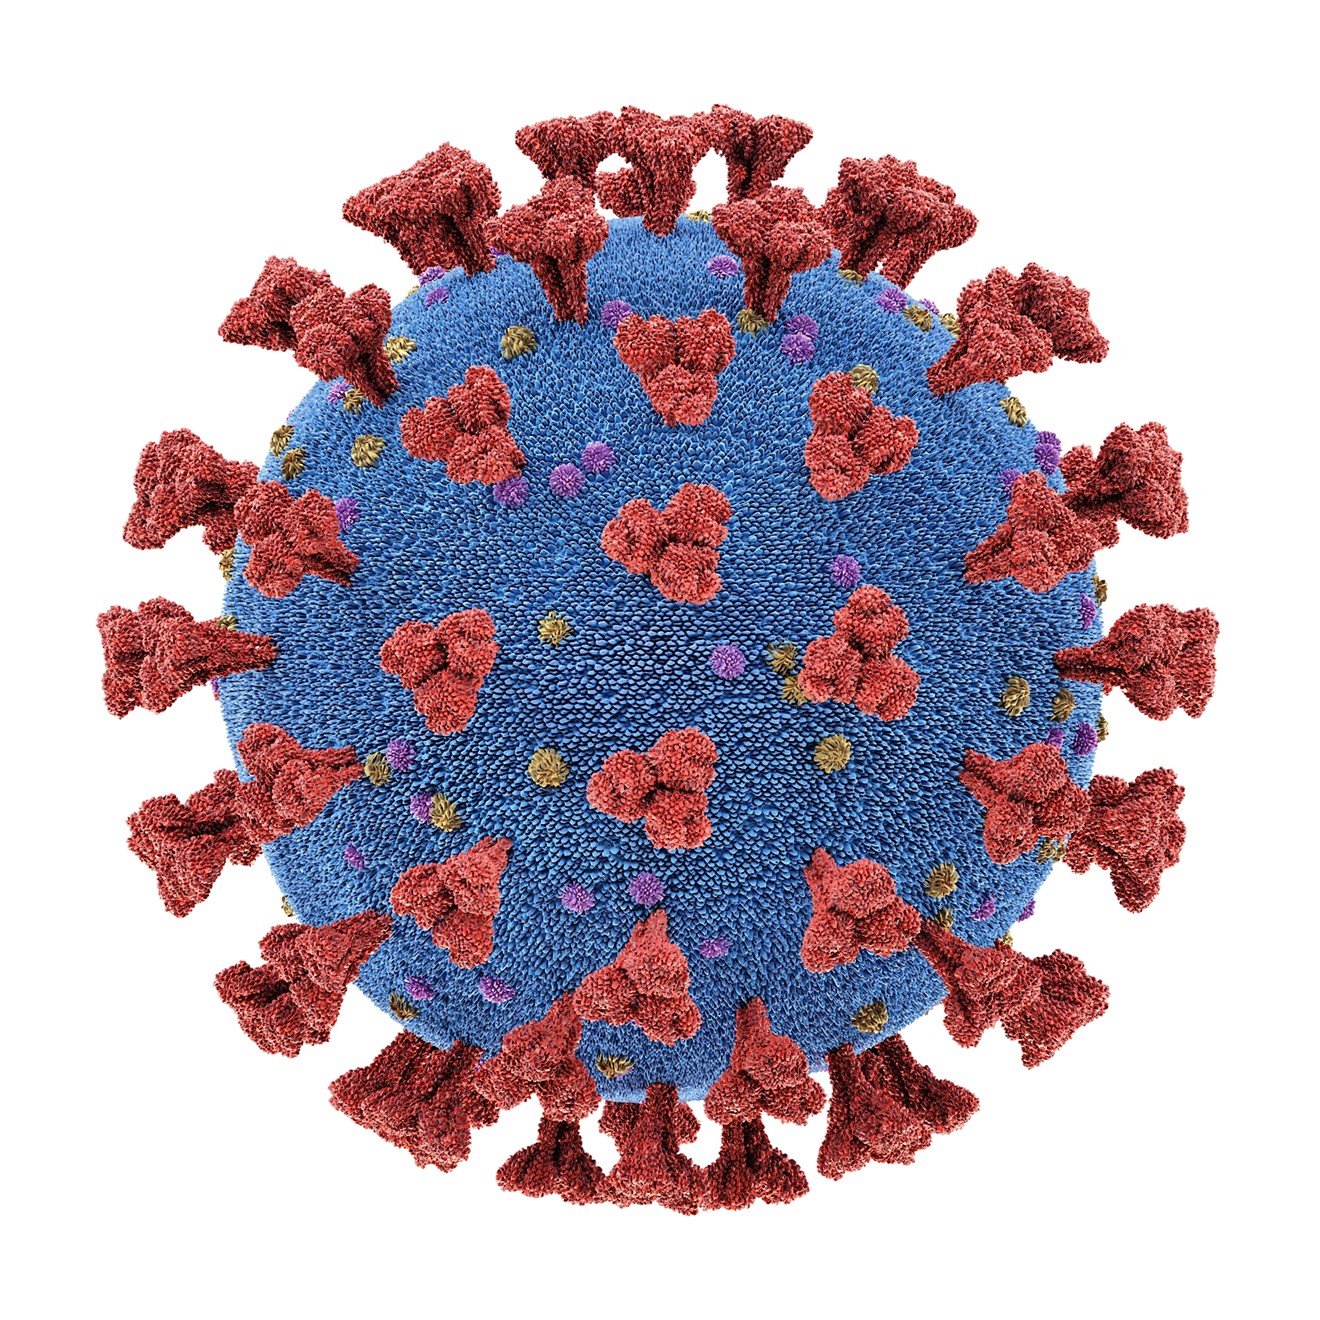 Dallas County reported its first coronavirus-related death on Thursday, March 19.